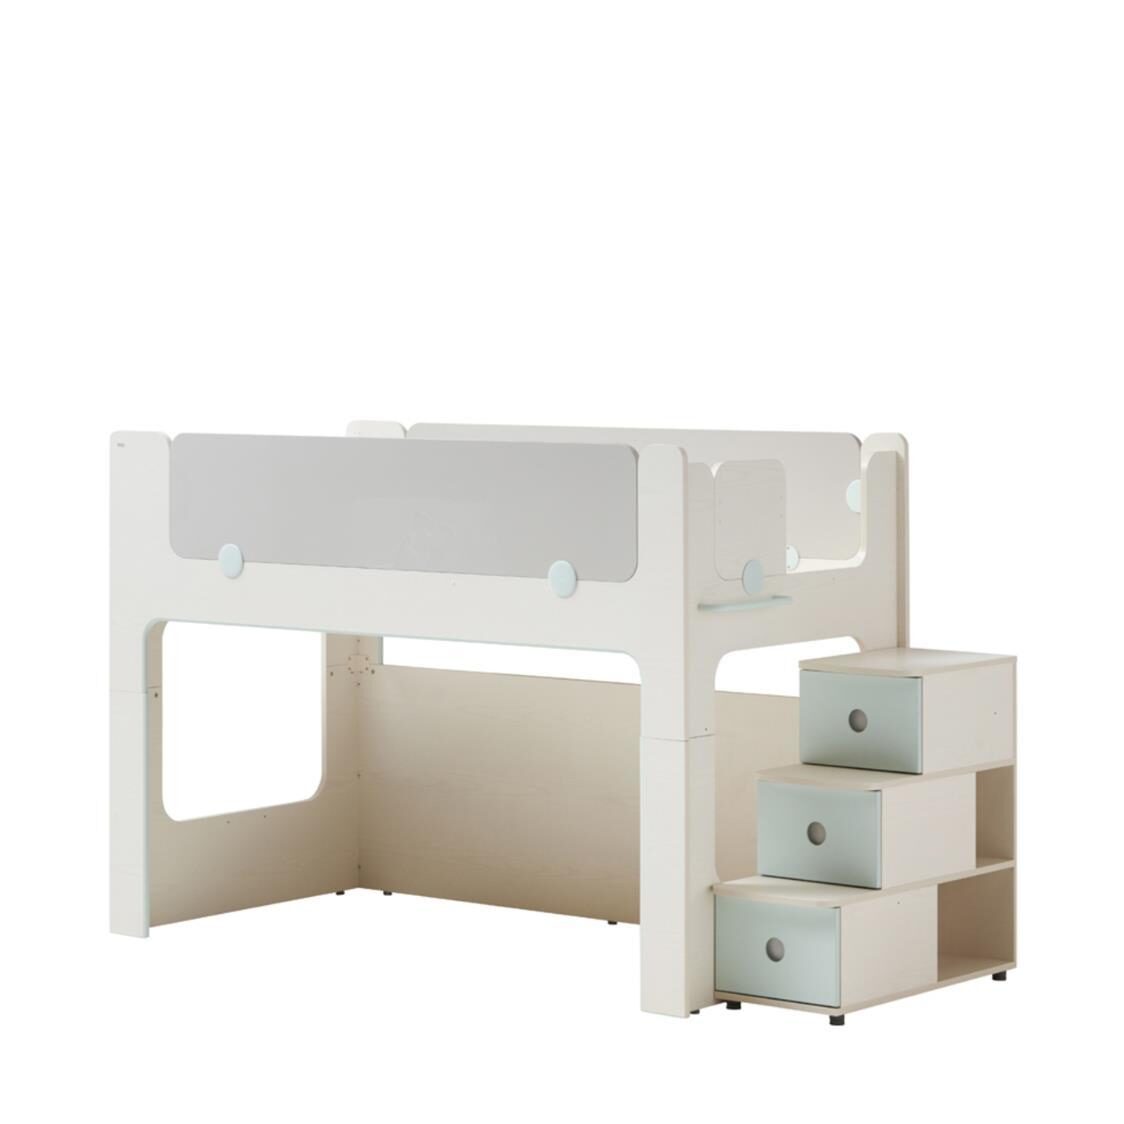 Iloom Cabin Bunk Bed Stairs Cabinet FIVLA Finland Ivory Light Aqua